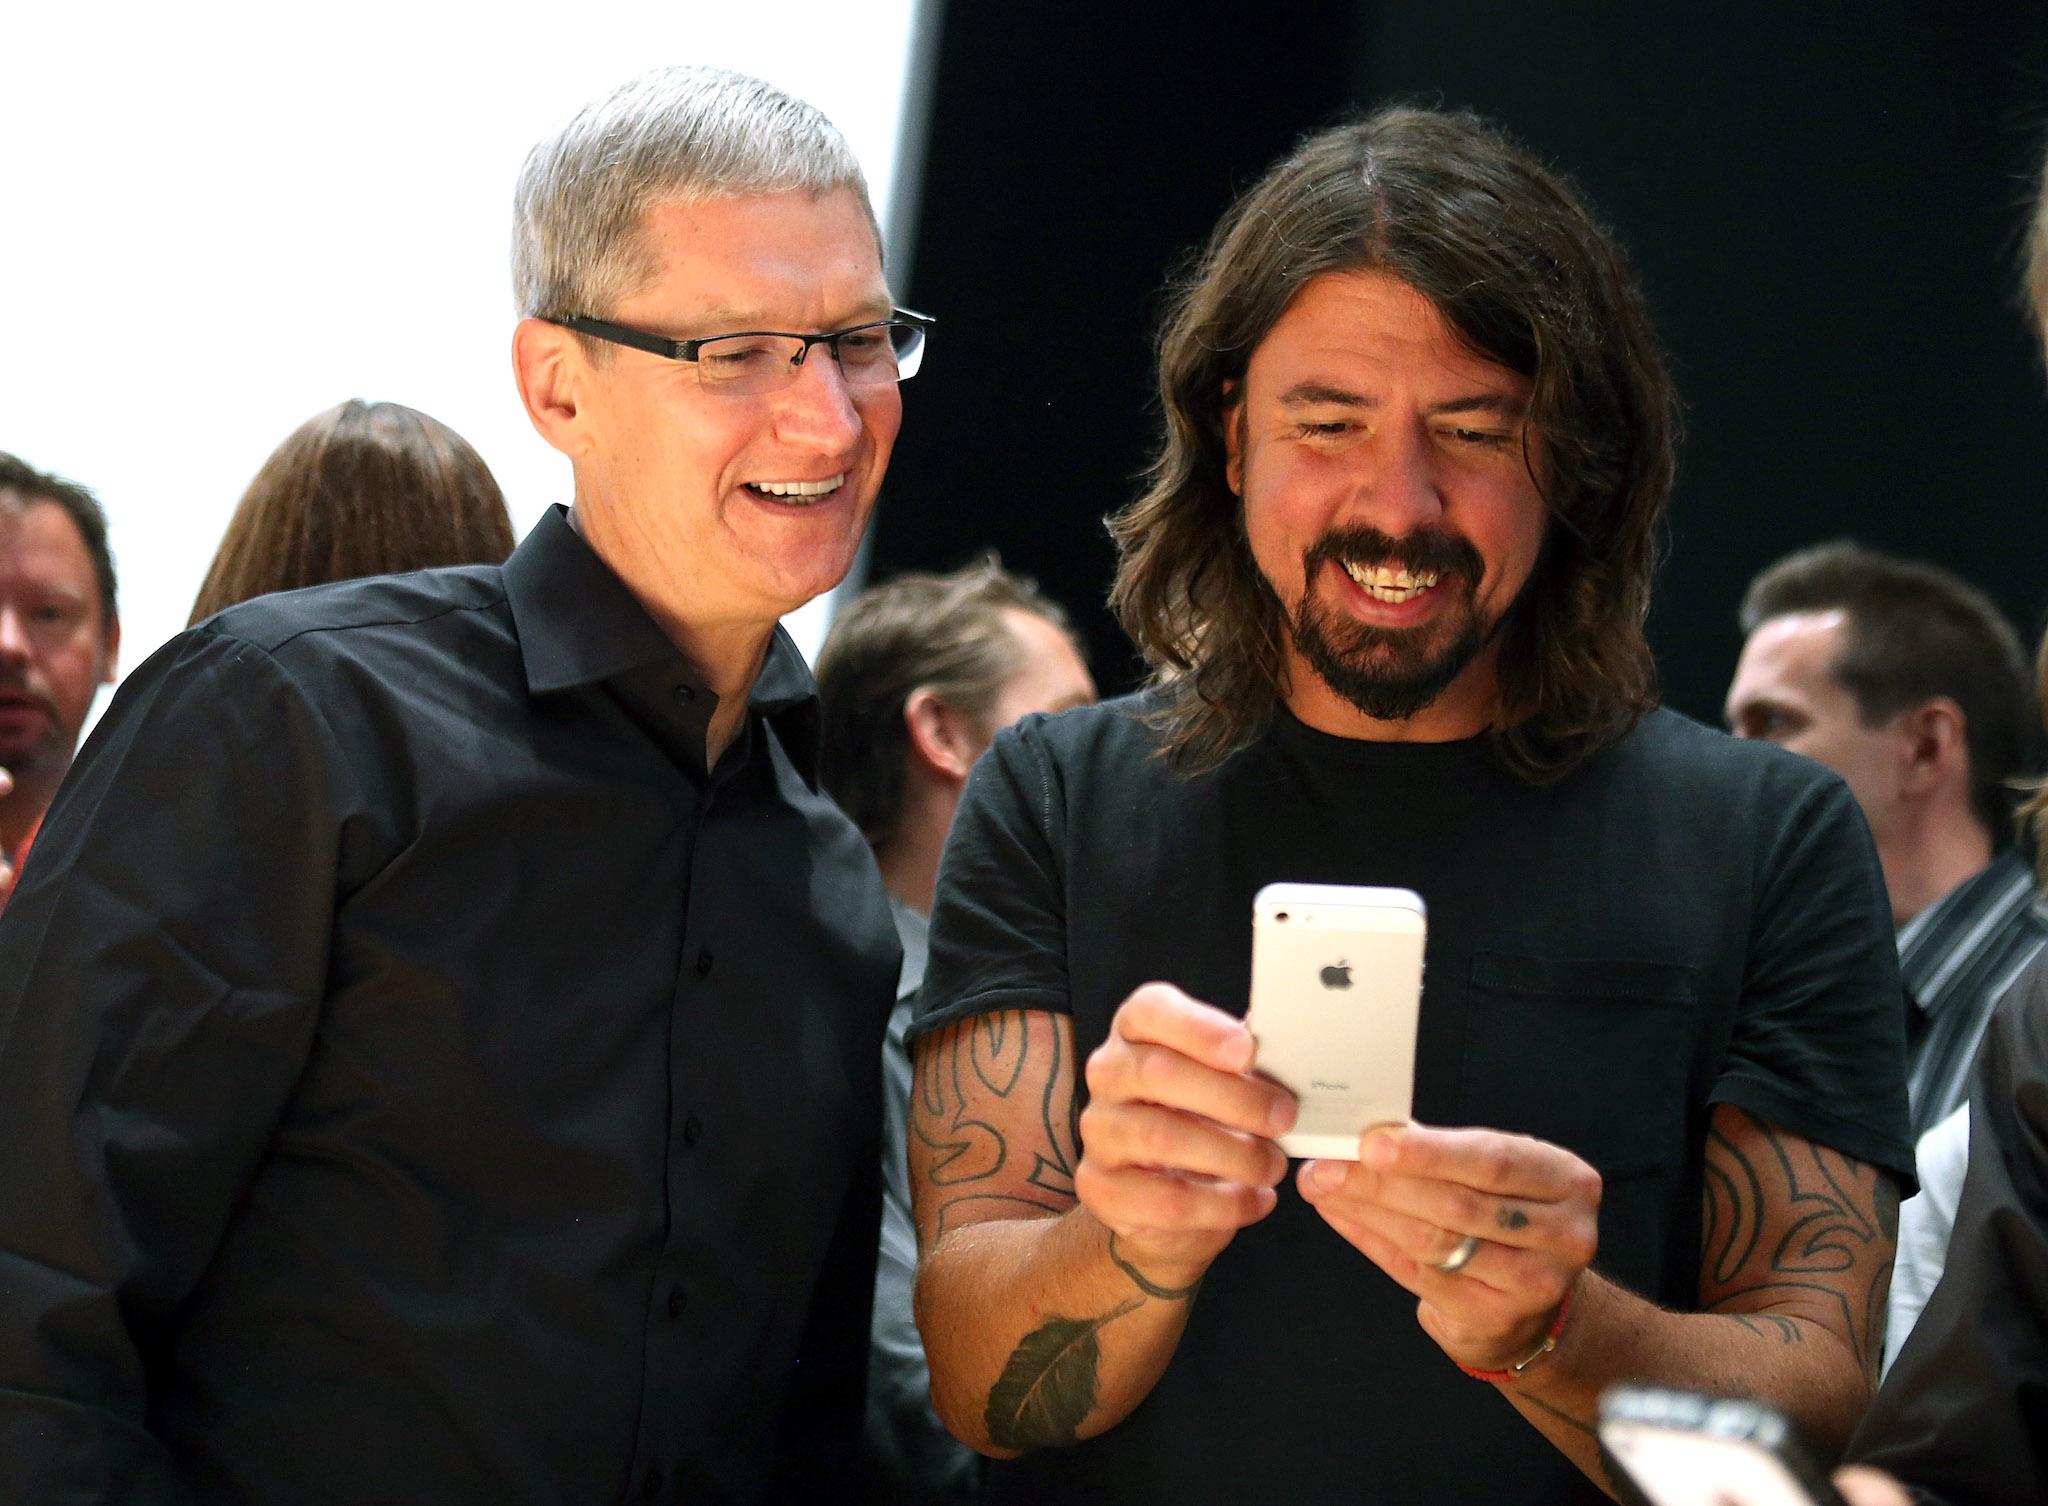 Apple CEO Tim Cook and Dave Grohl of the Foo Fighters look at the new iPhone 5 during an Apple special event